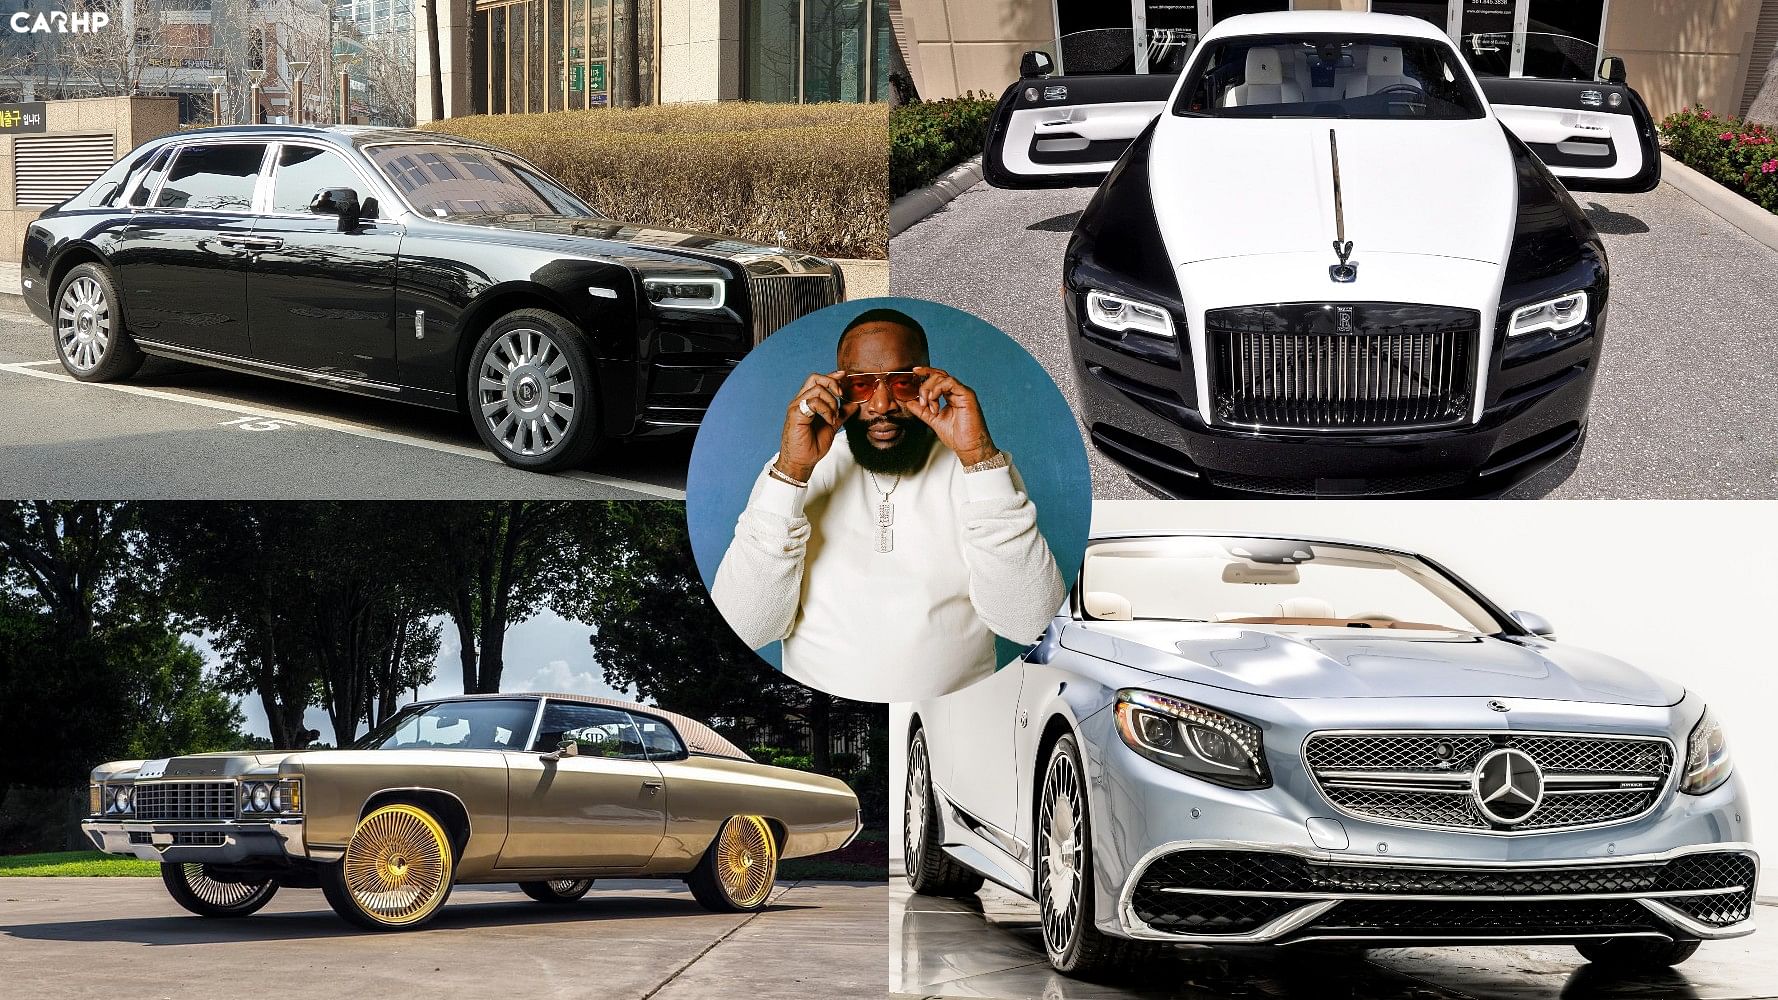 Rick Ross's Insane Car Collection From Chevrolets To RollsRoyces